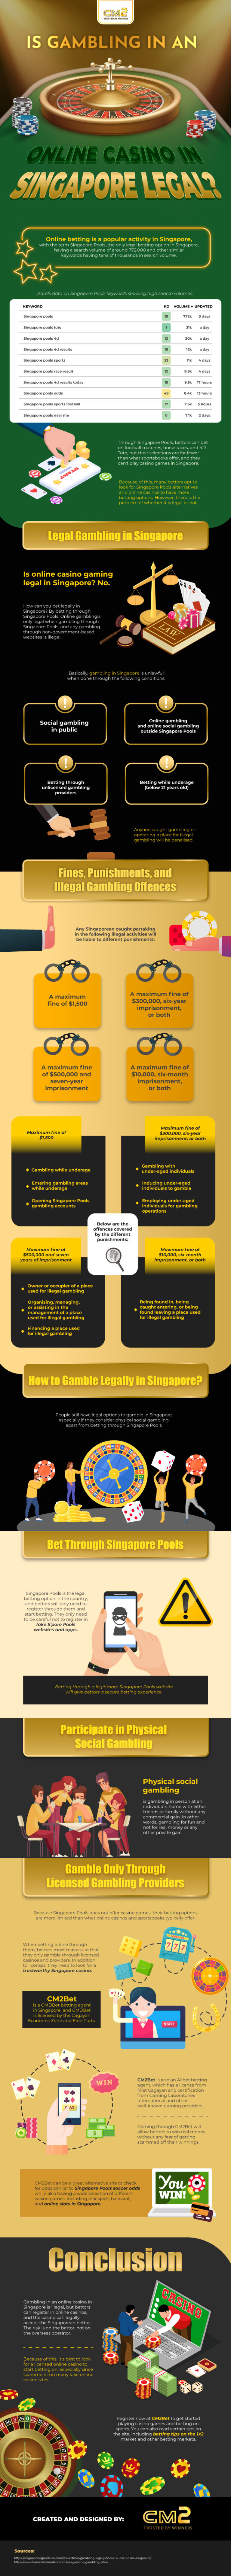 Is Gambling in an Online Casino in Singapore Legal 